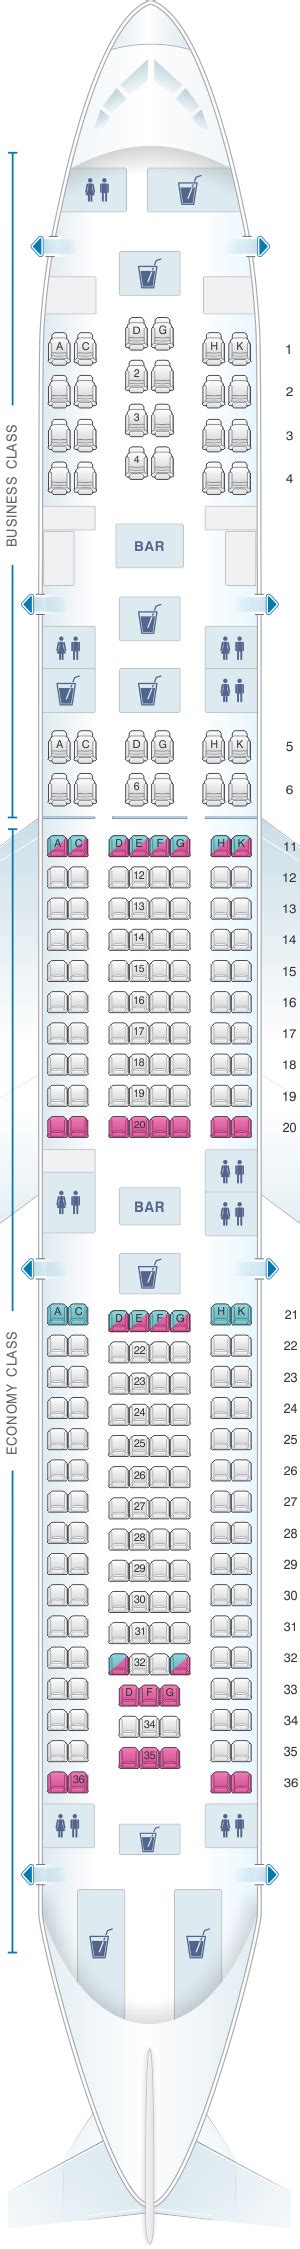 Seat Map Hi Fly Airbus A340 500 Tfxtfw 237pax Seatmaestro